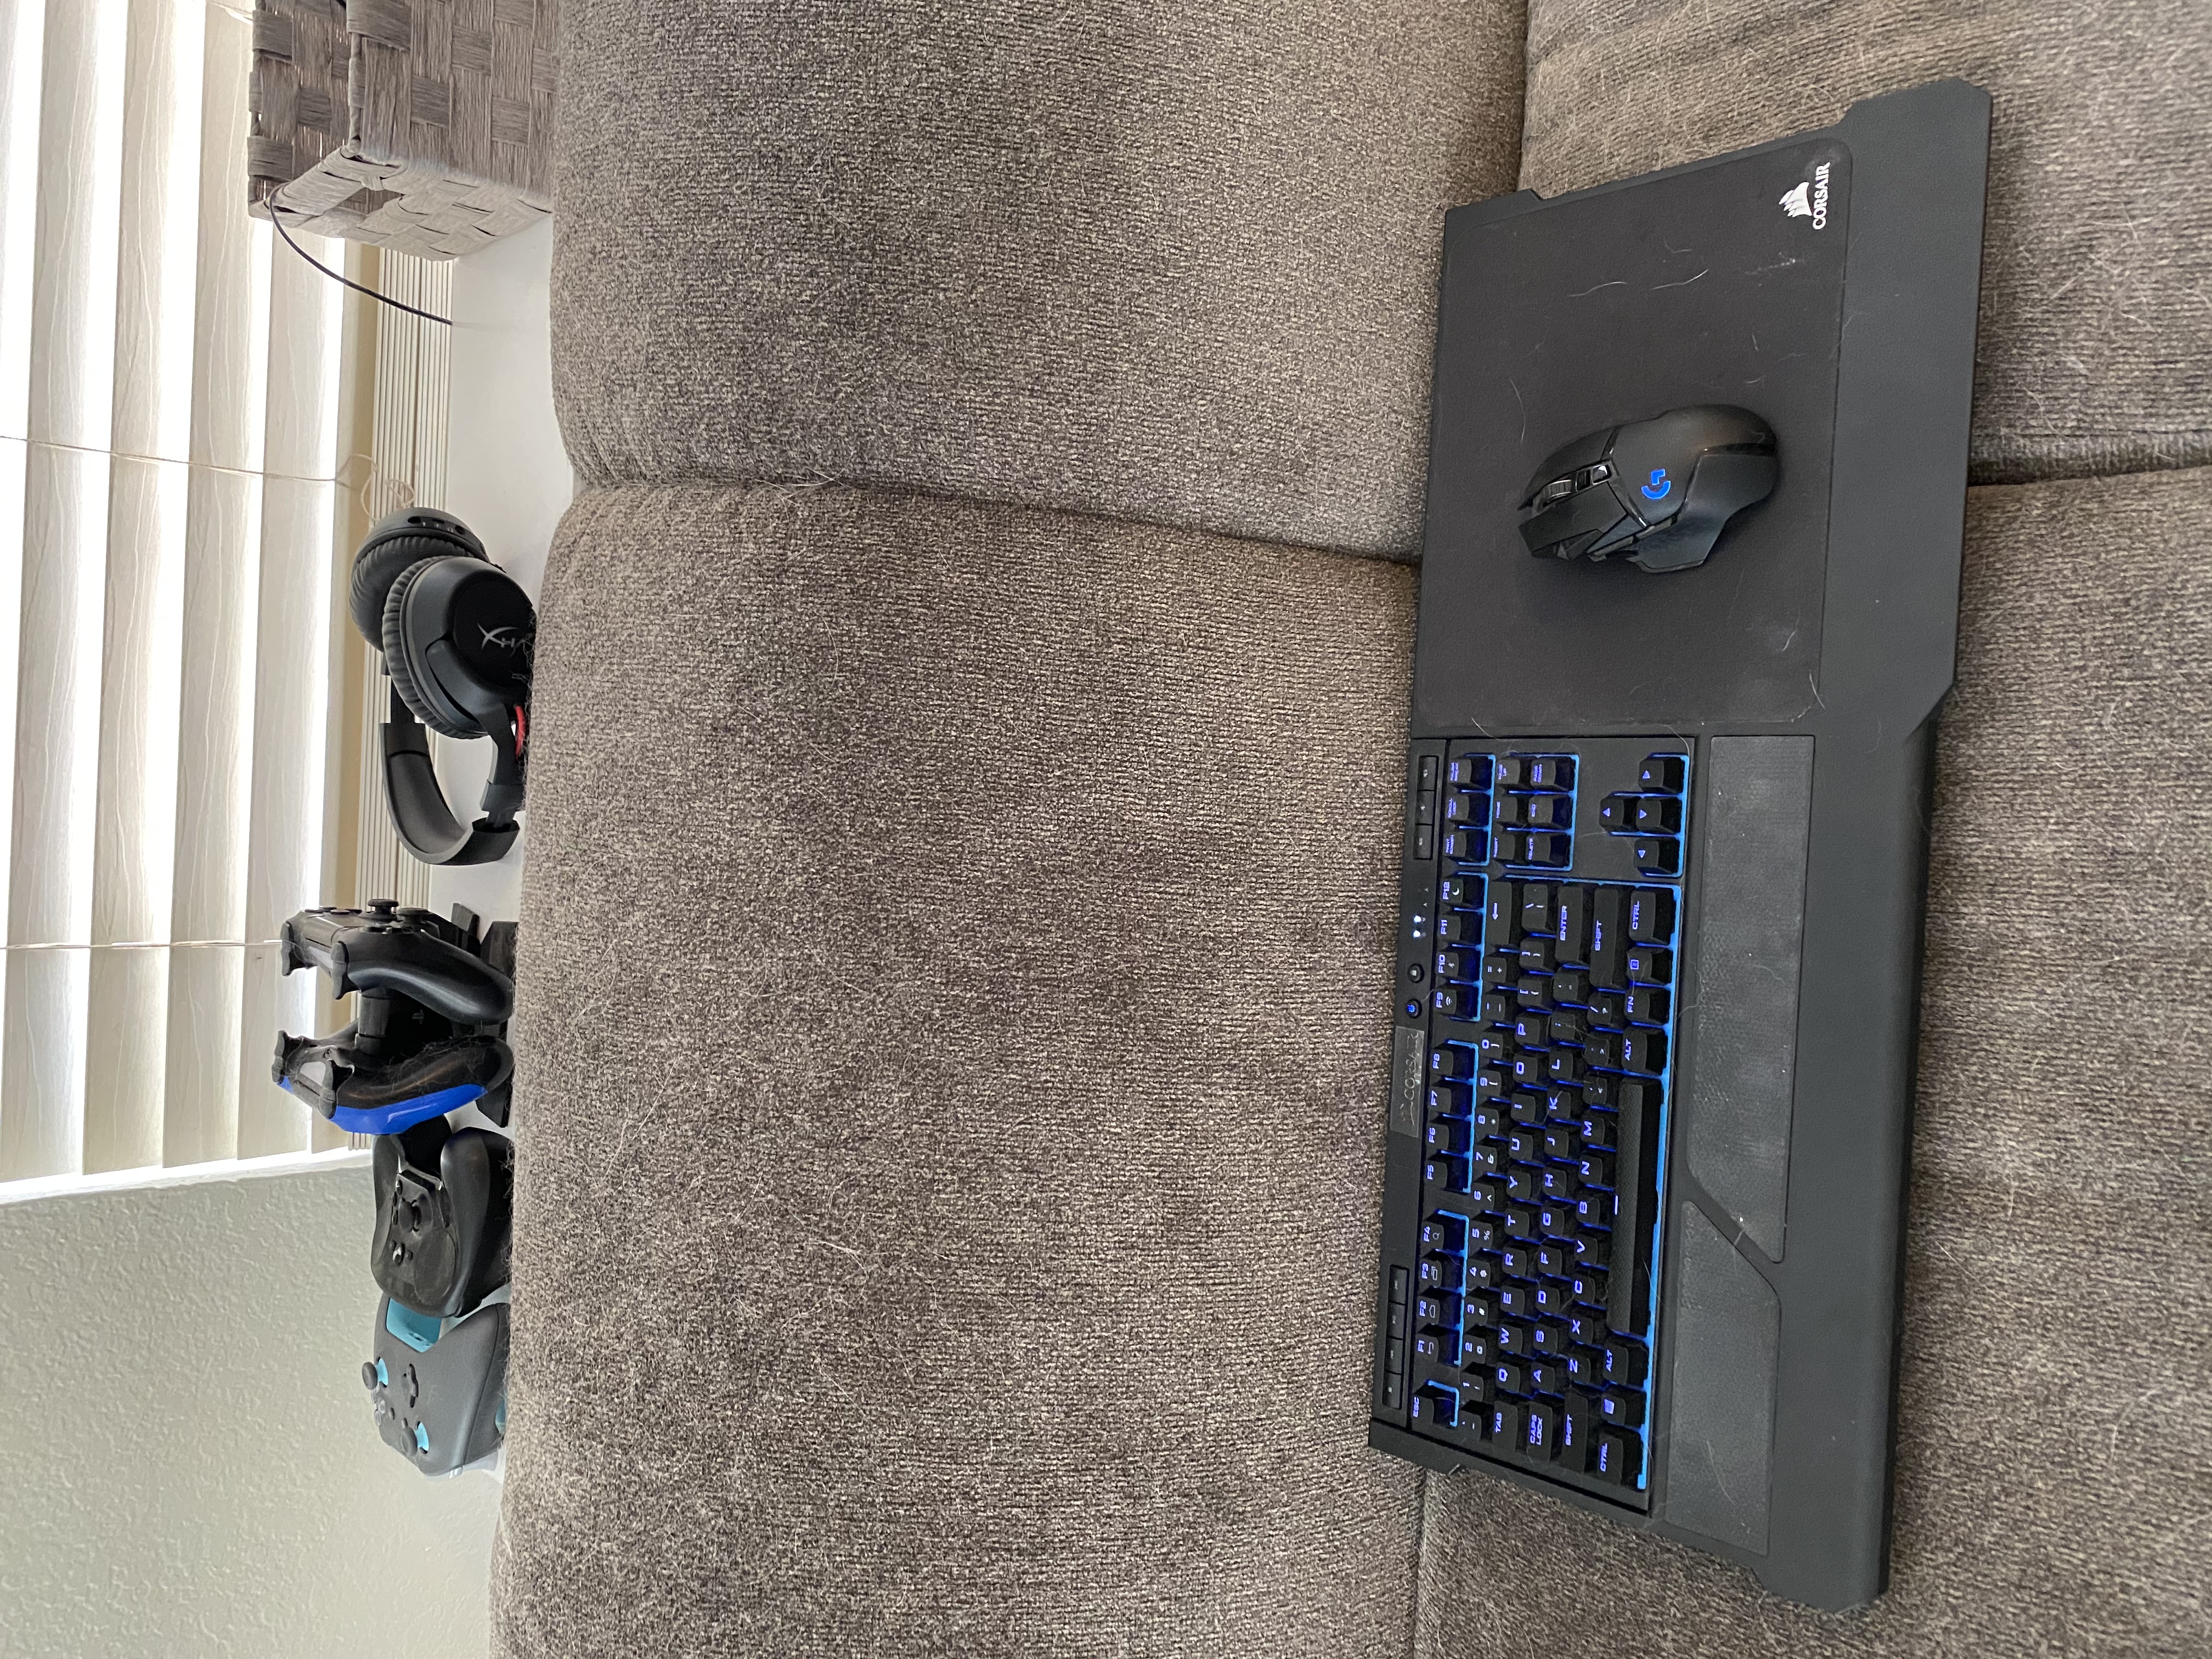 Couch gaming accessories